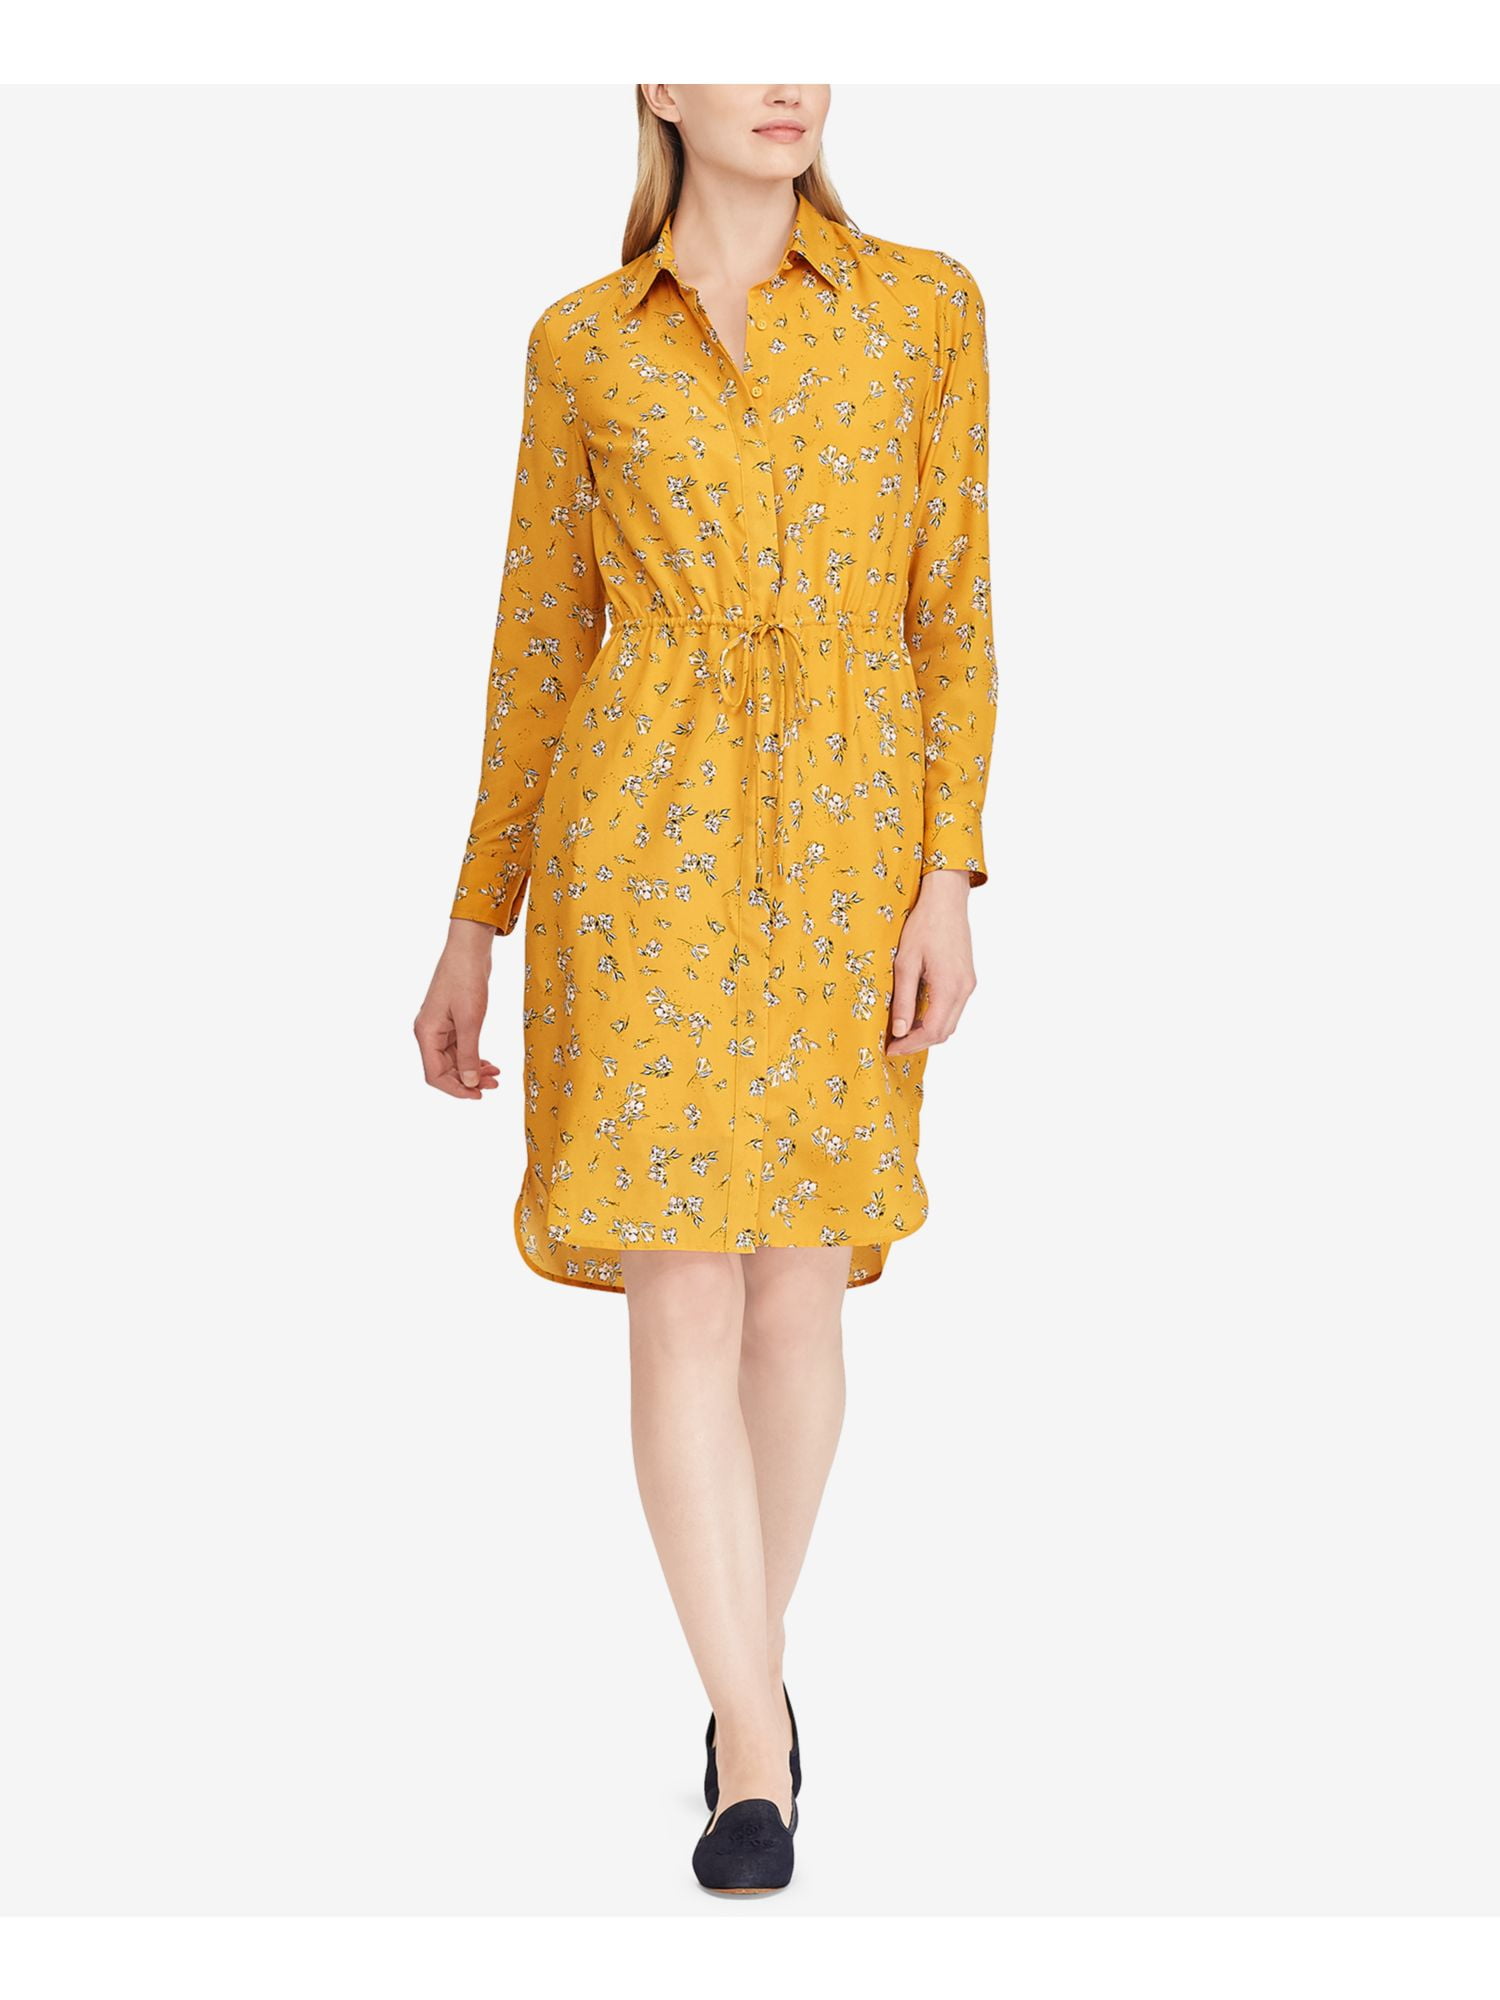 long sleeve yellow floral dress